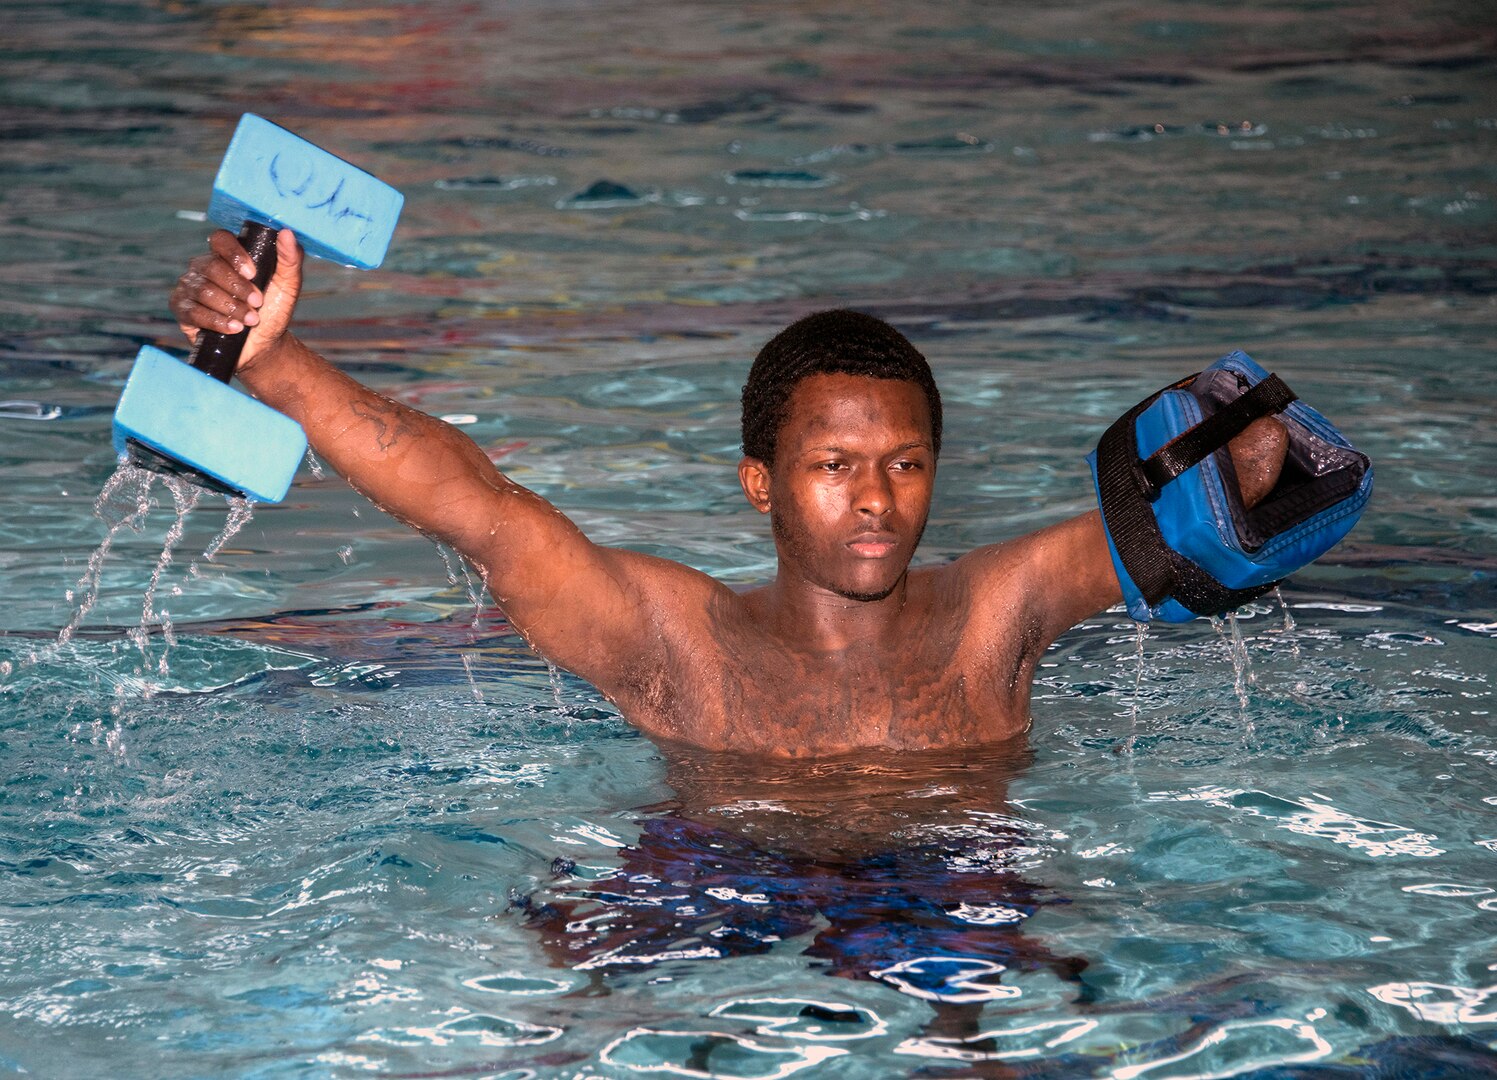 U.S. Army Staff Sgt. Kayshawn Porterfield exercises in the pool at Brooke Army Medical Center’s Center for the Intrepid at Joint Base San Antonio-Fort Sam Houston Feb. 20. Aquatic therapy is used to improve balance, coordination and flexibility as well as building muscle strength and endurance.